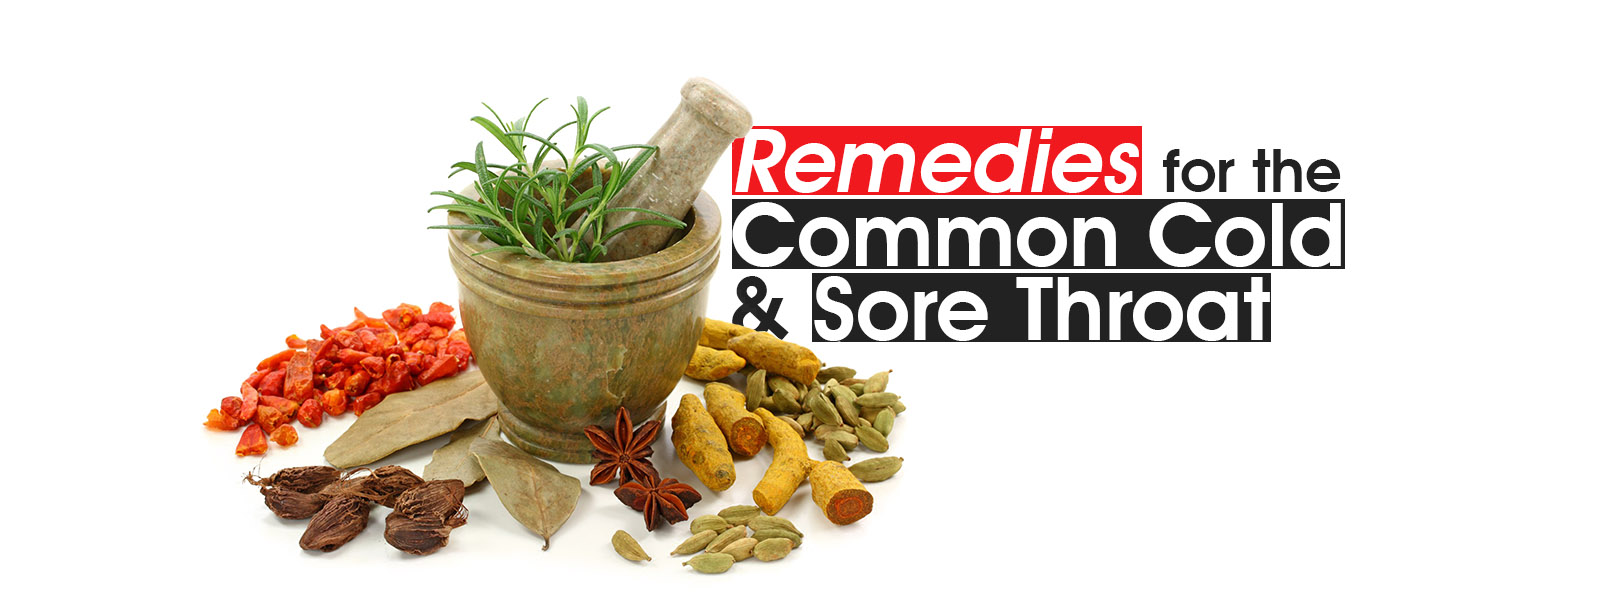 7 Remedies for the Common Cold & Sore Throat